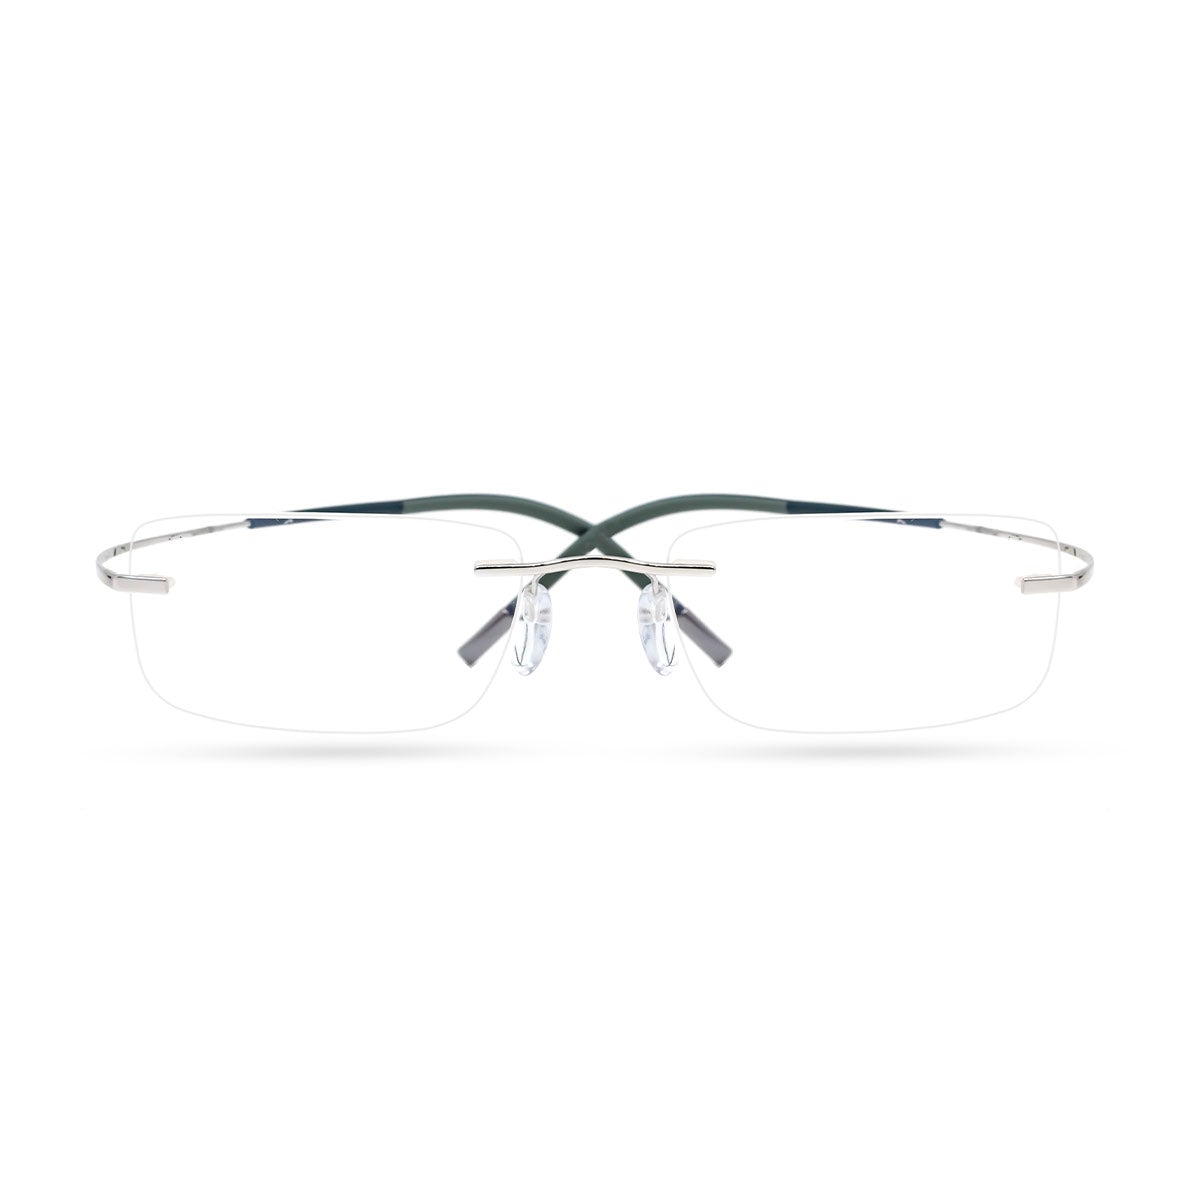 SILHOUETTE 7577 00 6160/7581 spectacle-frame